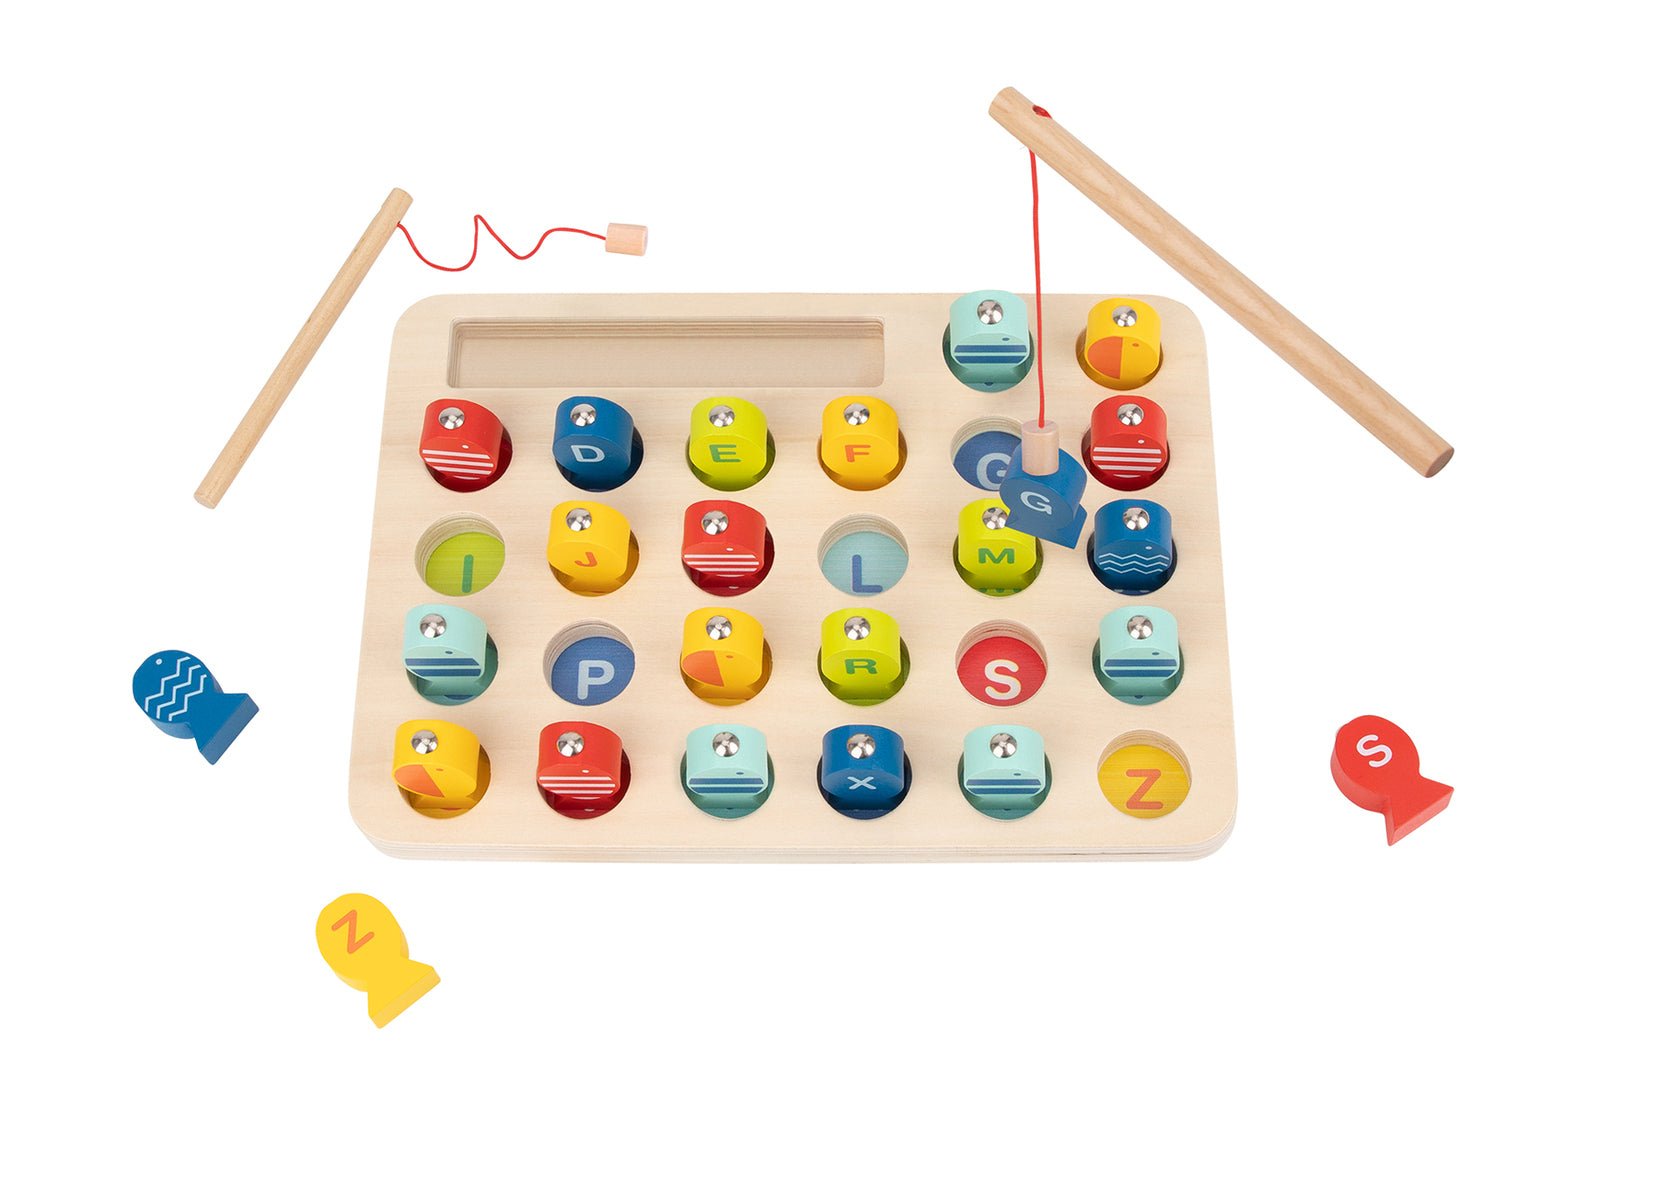 Magnetic Fishing Game With Alphabet